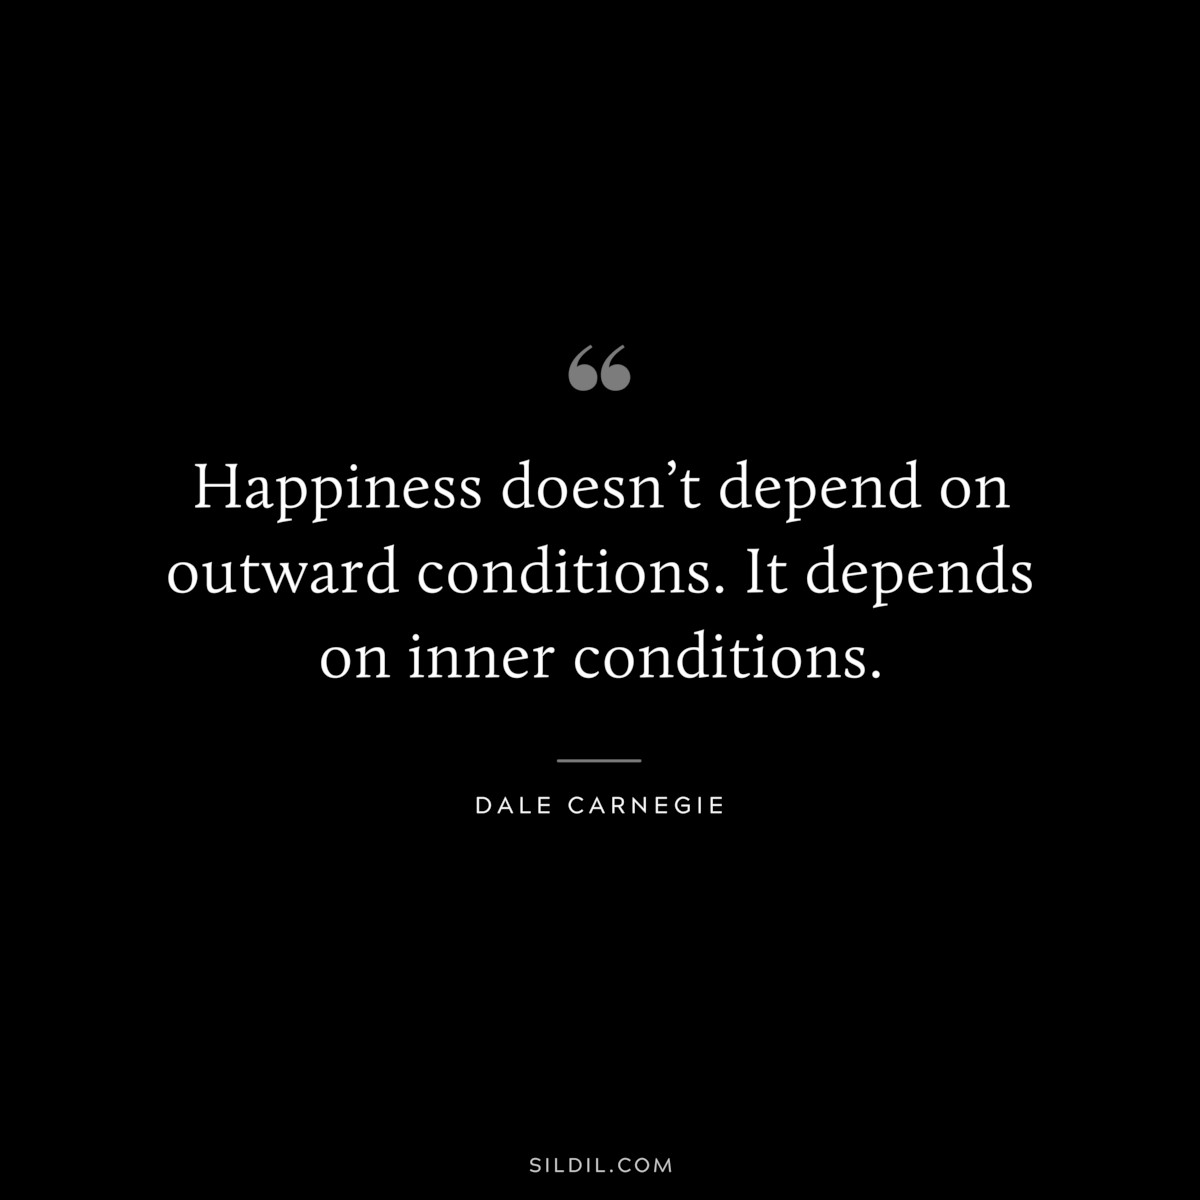 Happiness doesn’t depend on outward conditions. It depends on inner conditions.― Dale Carnegie